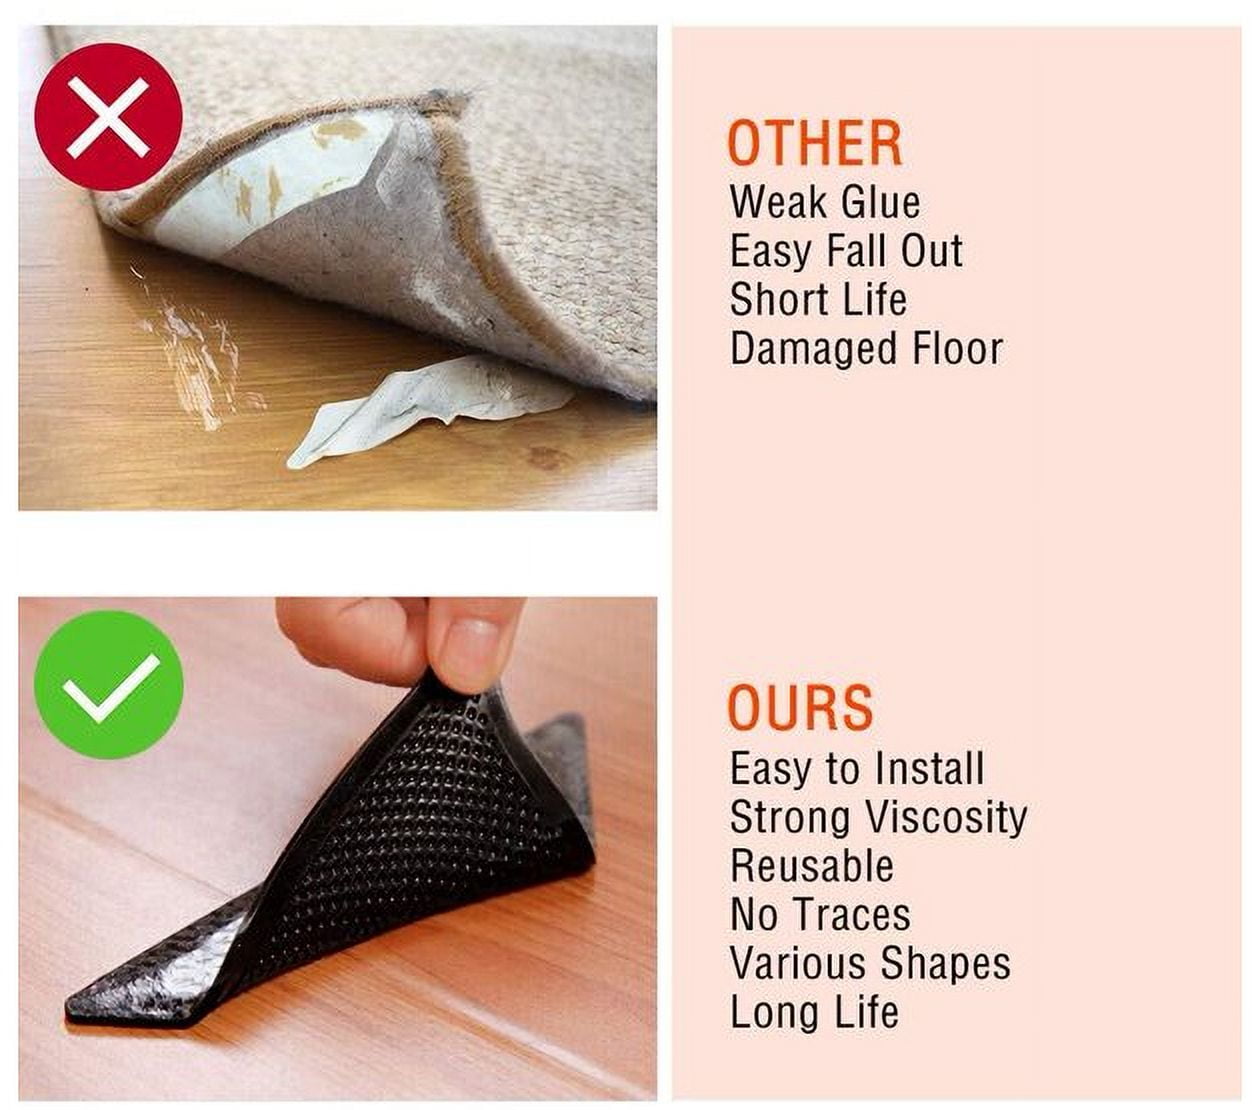 ANTI SKID Stainmaster Petprotect Carpet PADS: Reusable PU Non Slip Rug Grips  With Suction Grip From Jingbaisha08, $0.31